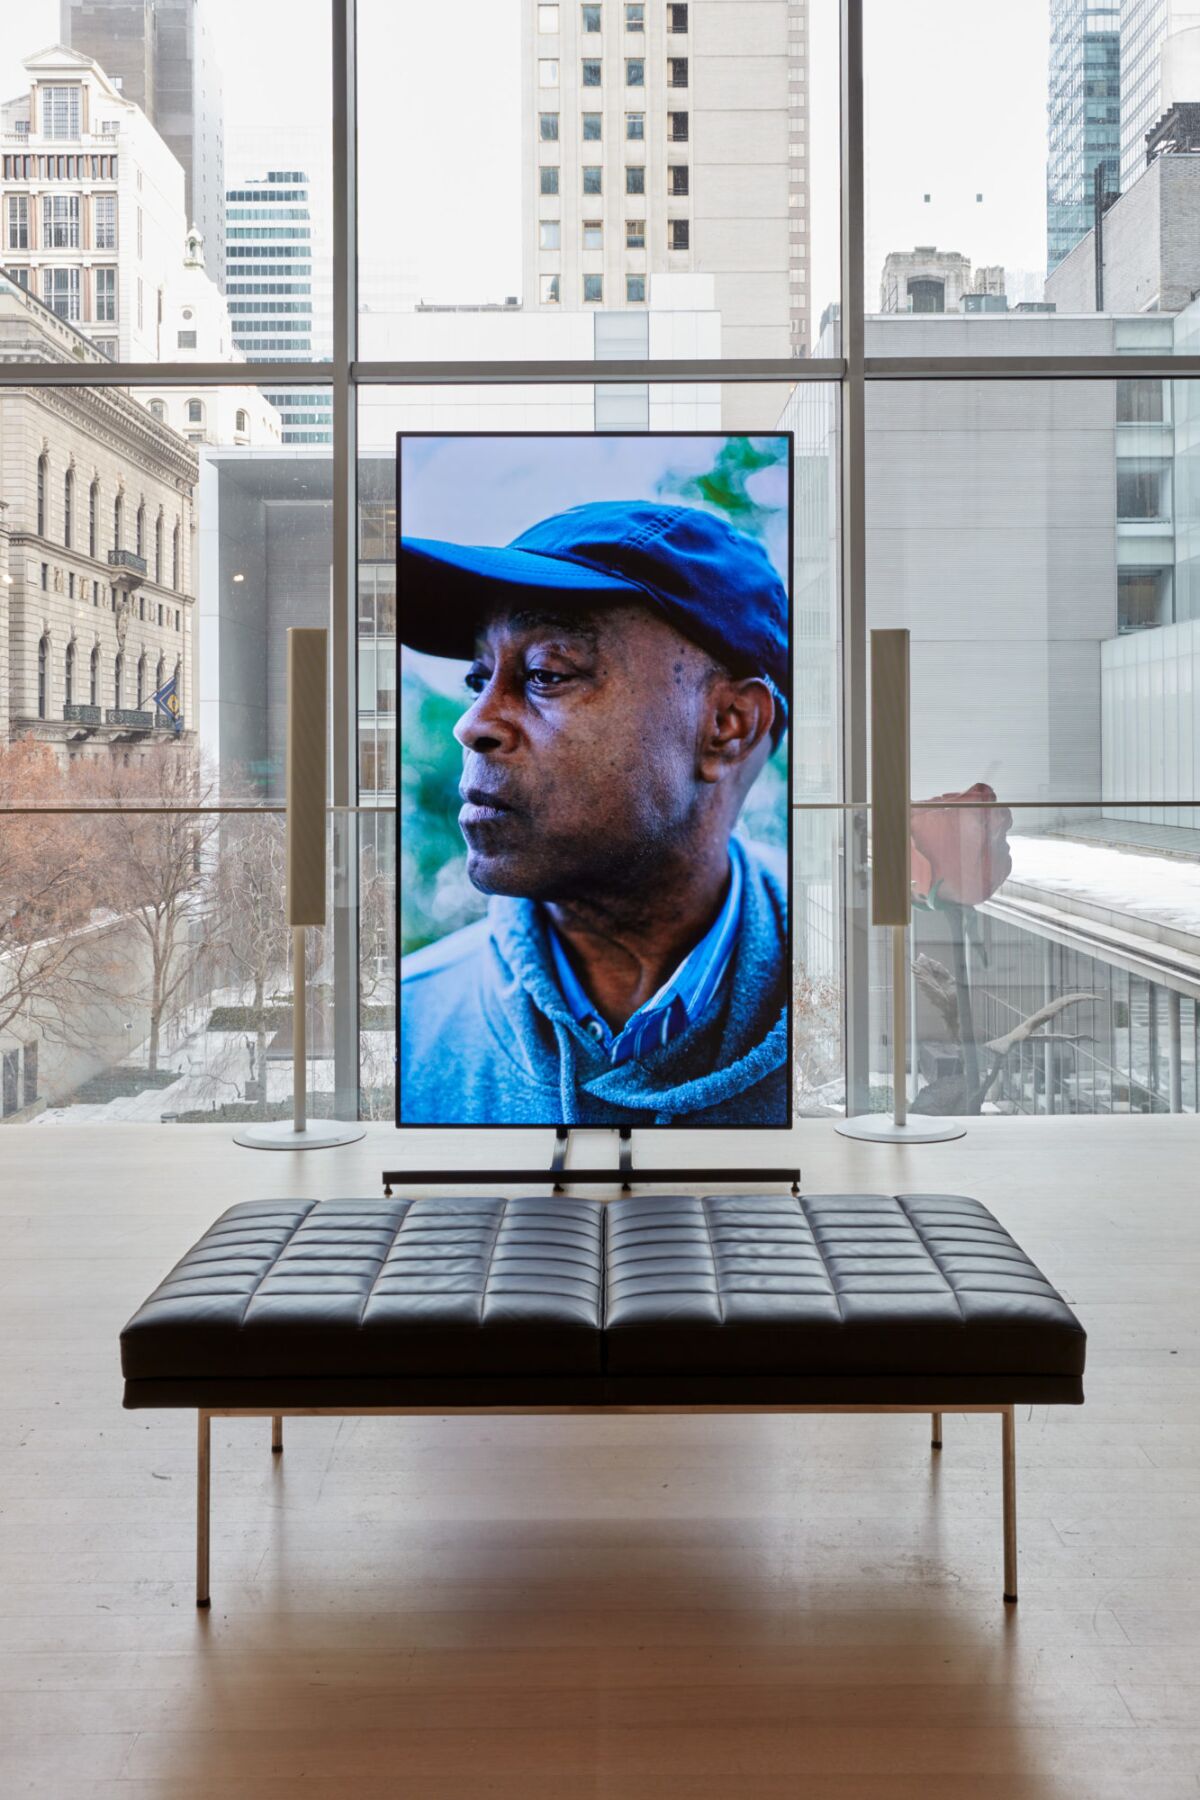 A window-lined gallery frames a video installation that show the figure of a Black man.